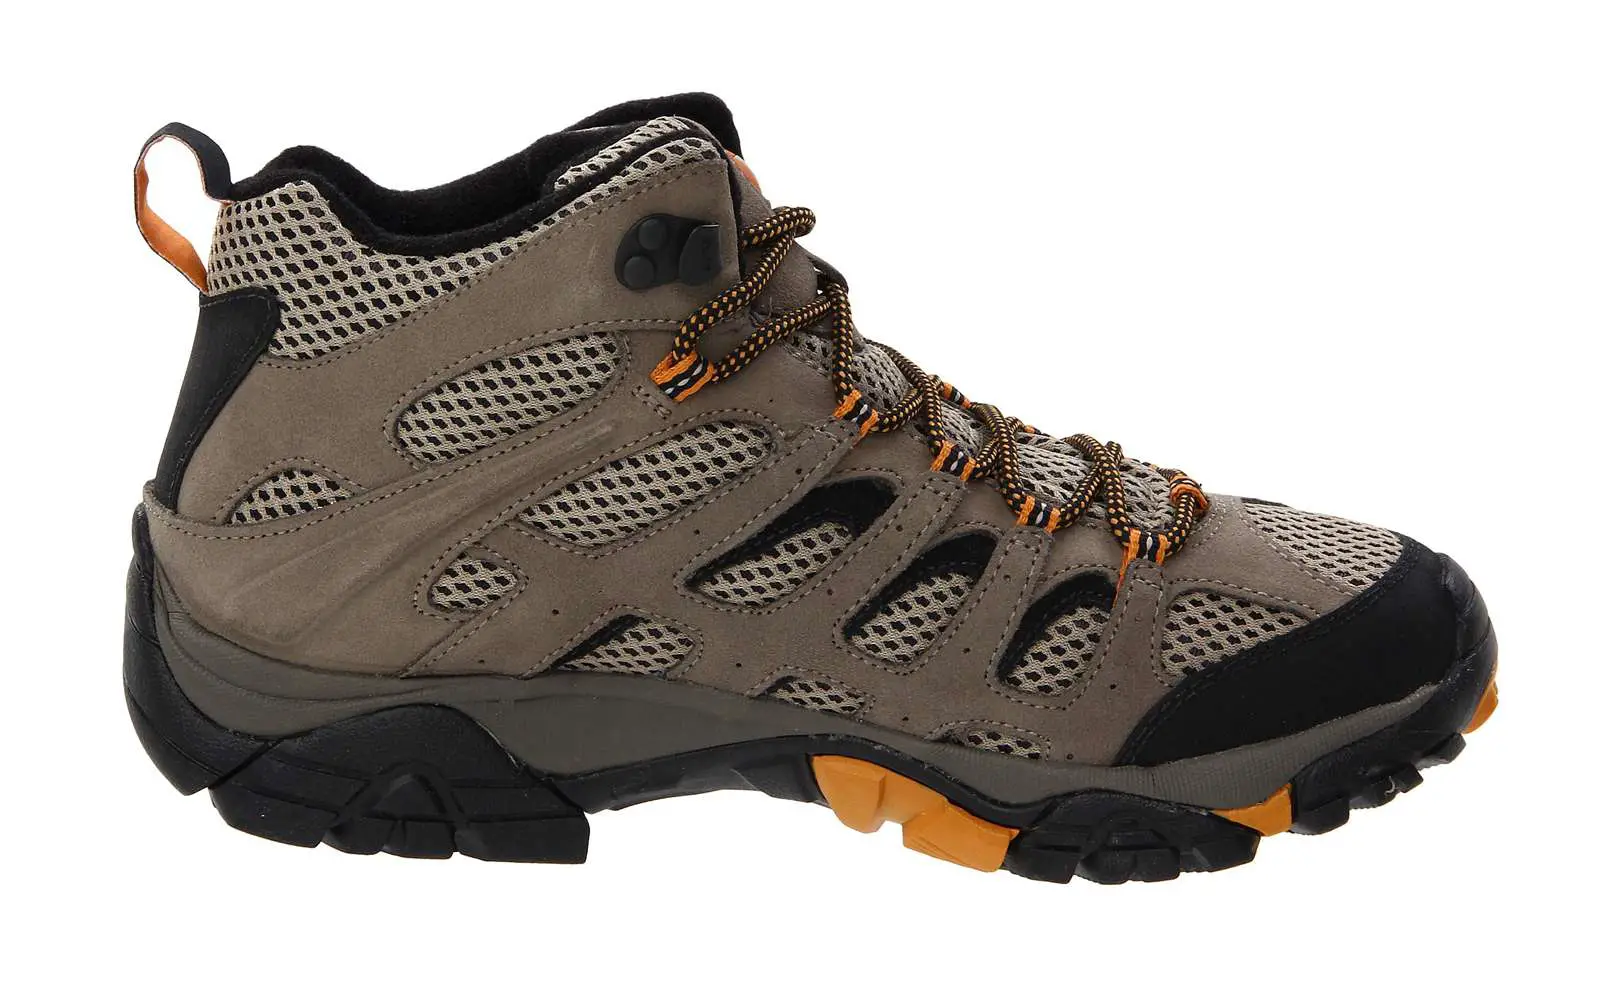 The Best Hiking Shoes and Boots for Men